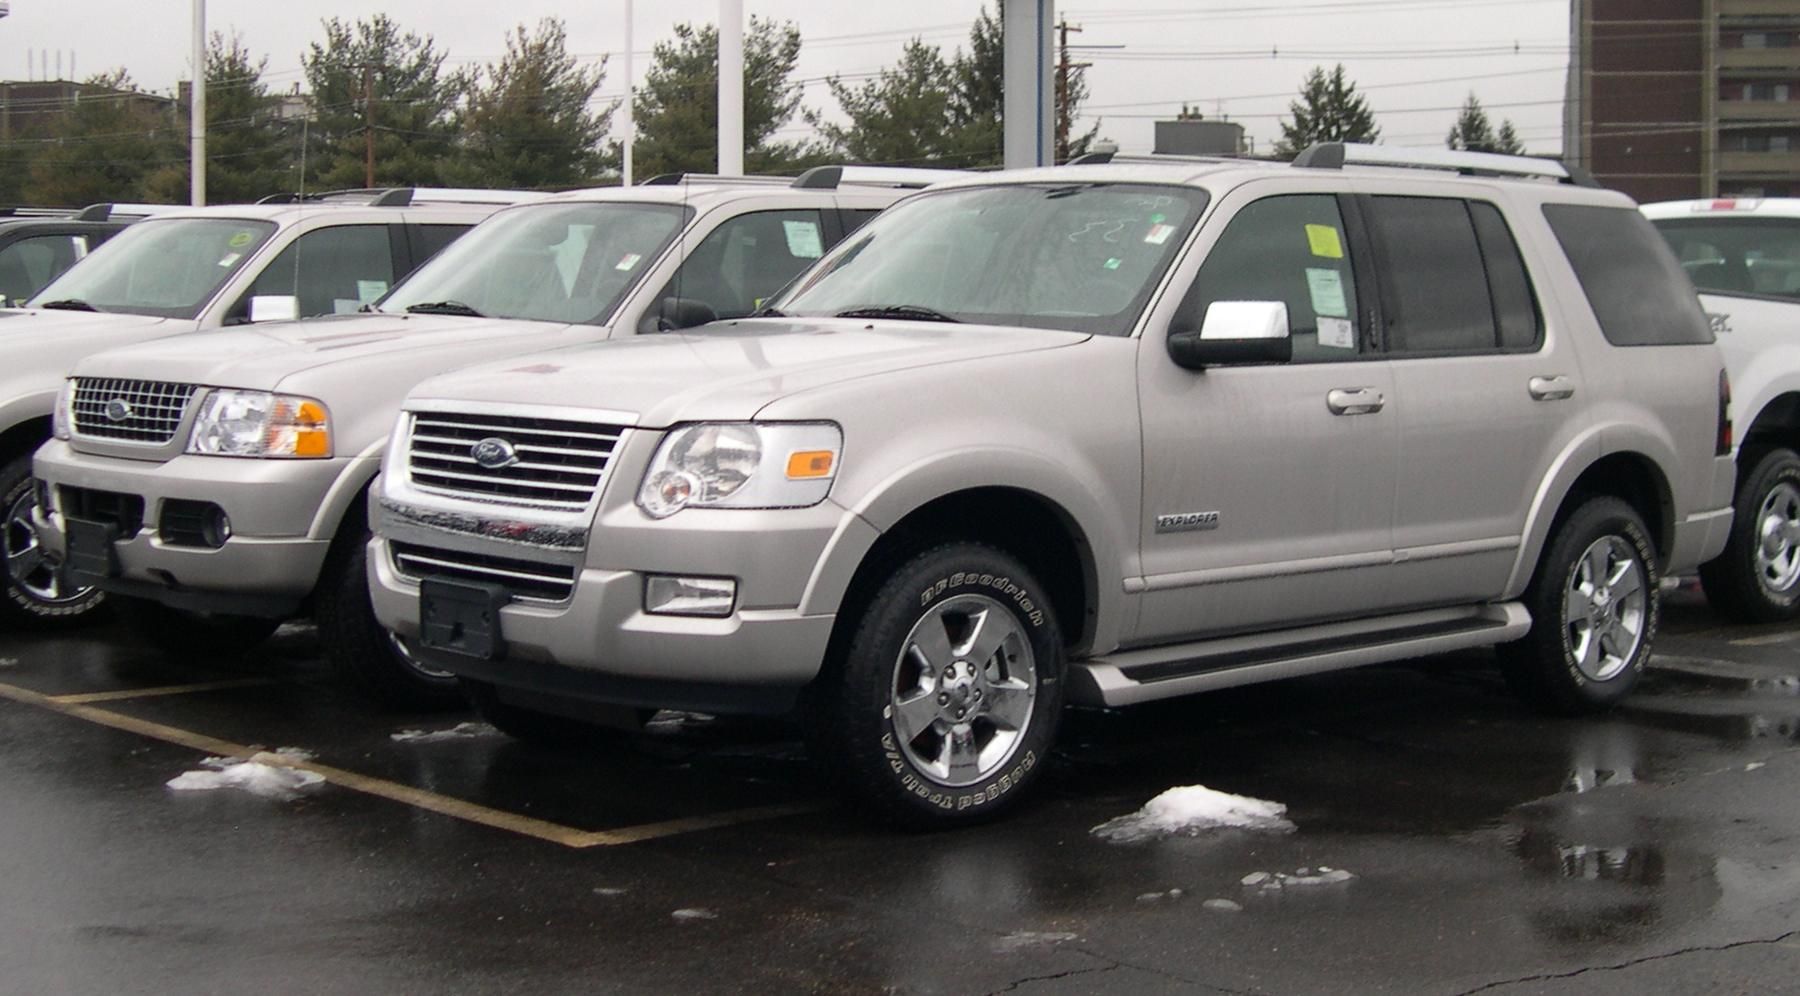  The 2005 Ford Explorer on sale.